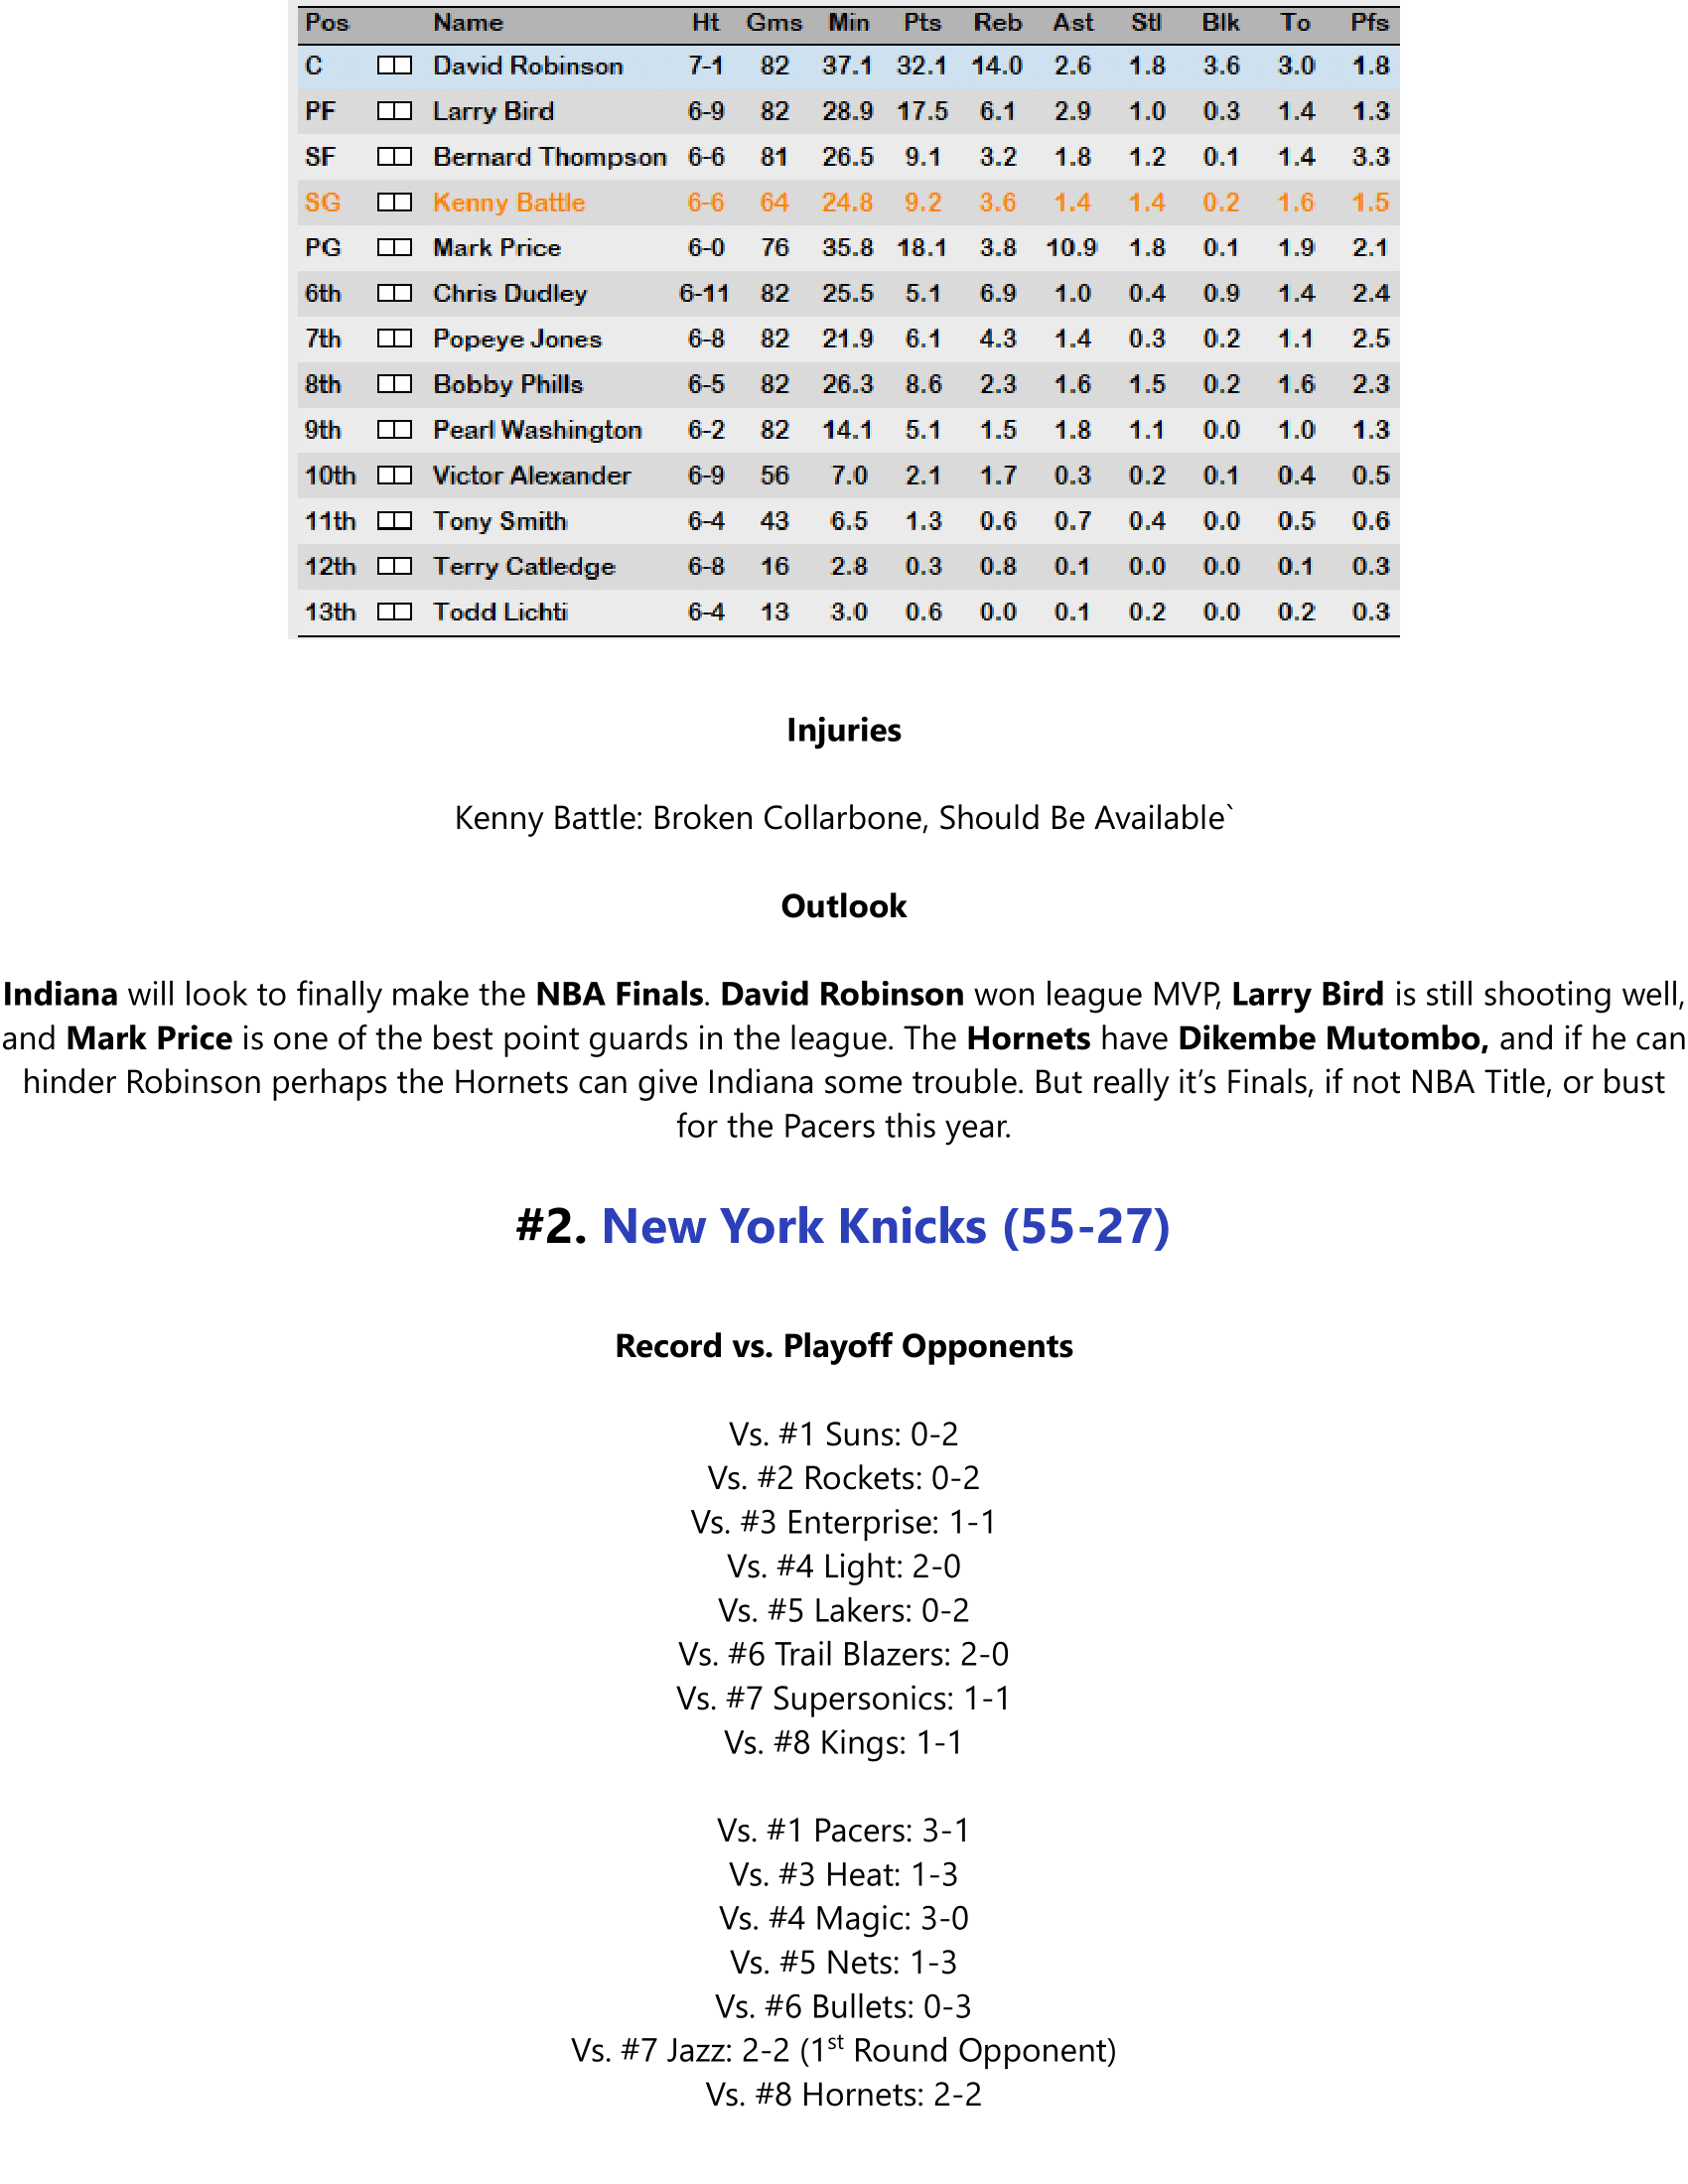 92-93-Part-4-Playoff-Preview-15.png